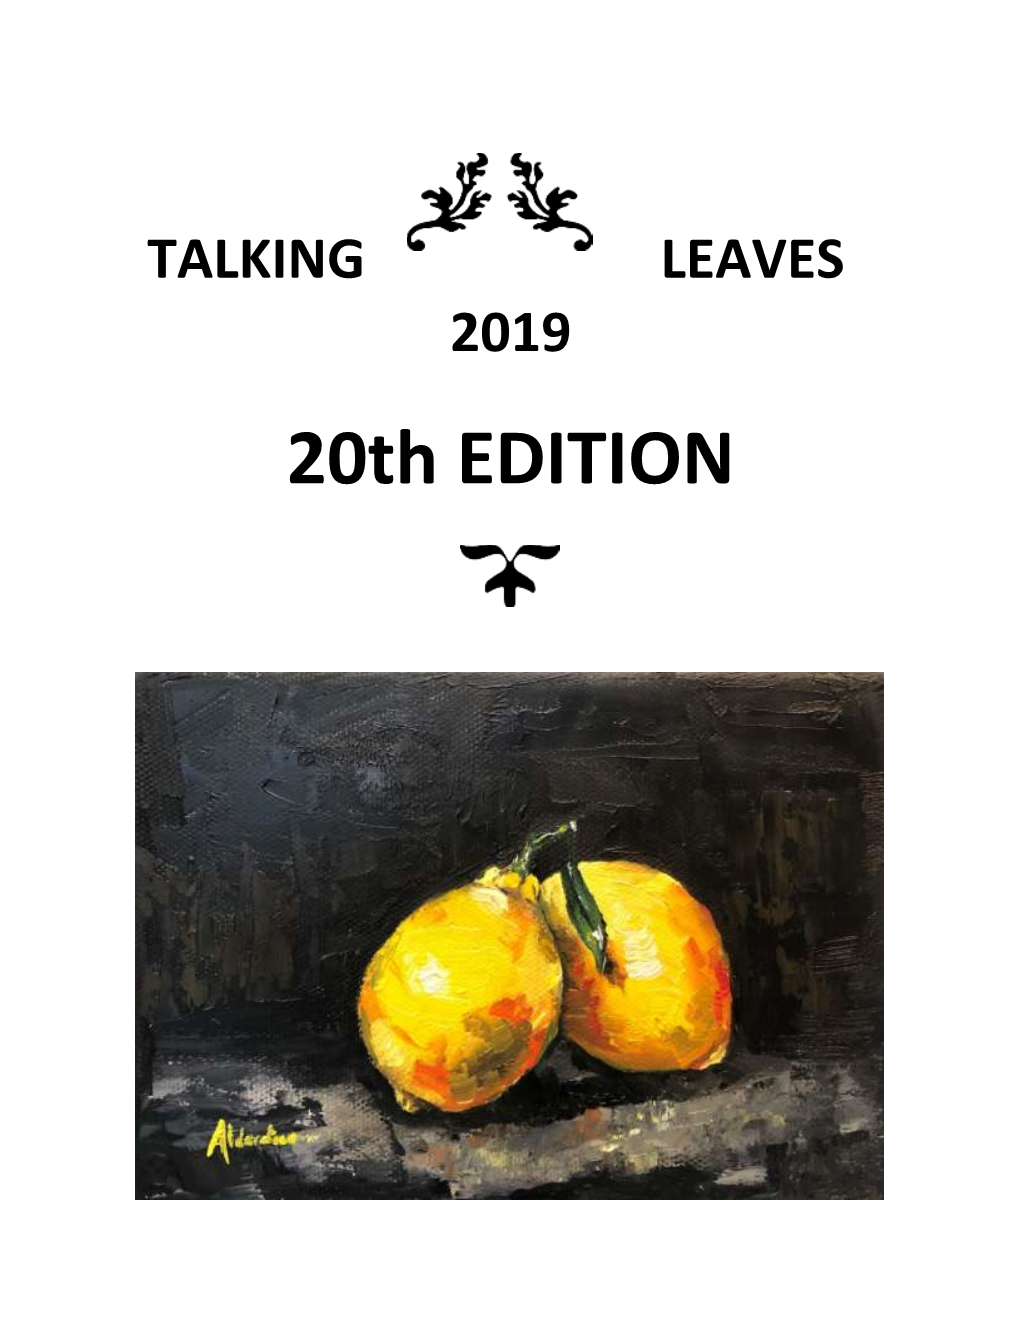 TALKING LEAVES 2019 20Th EDITION